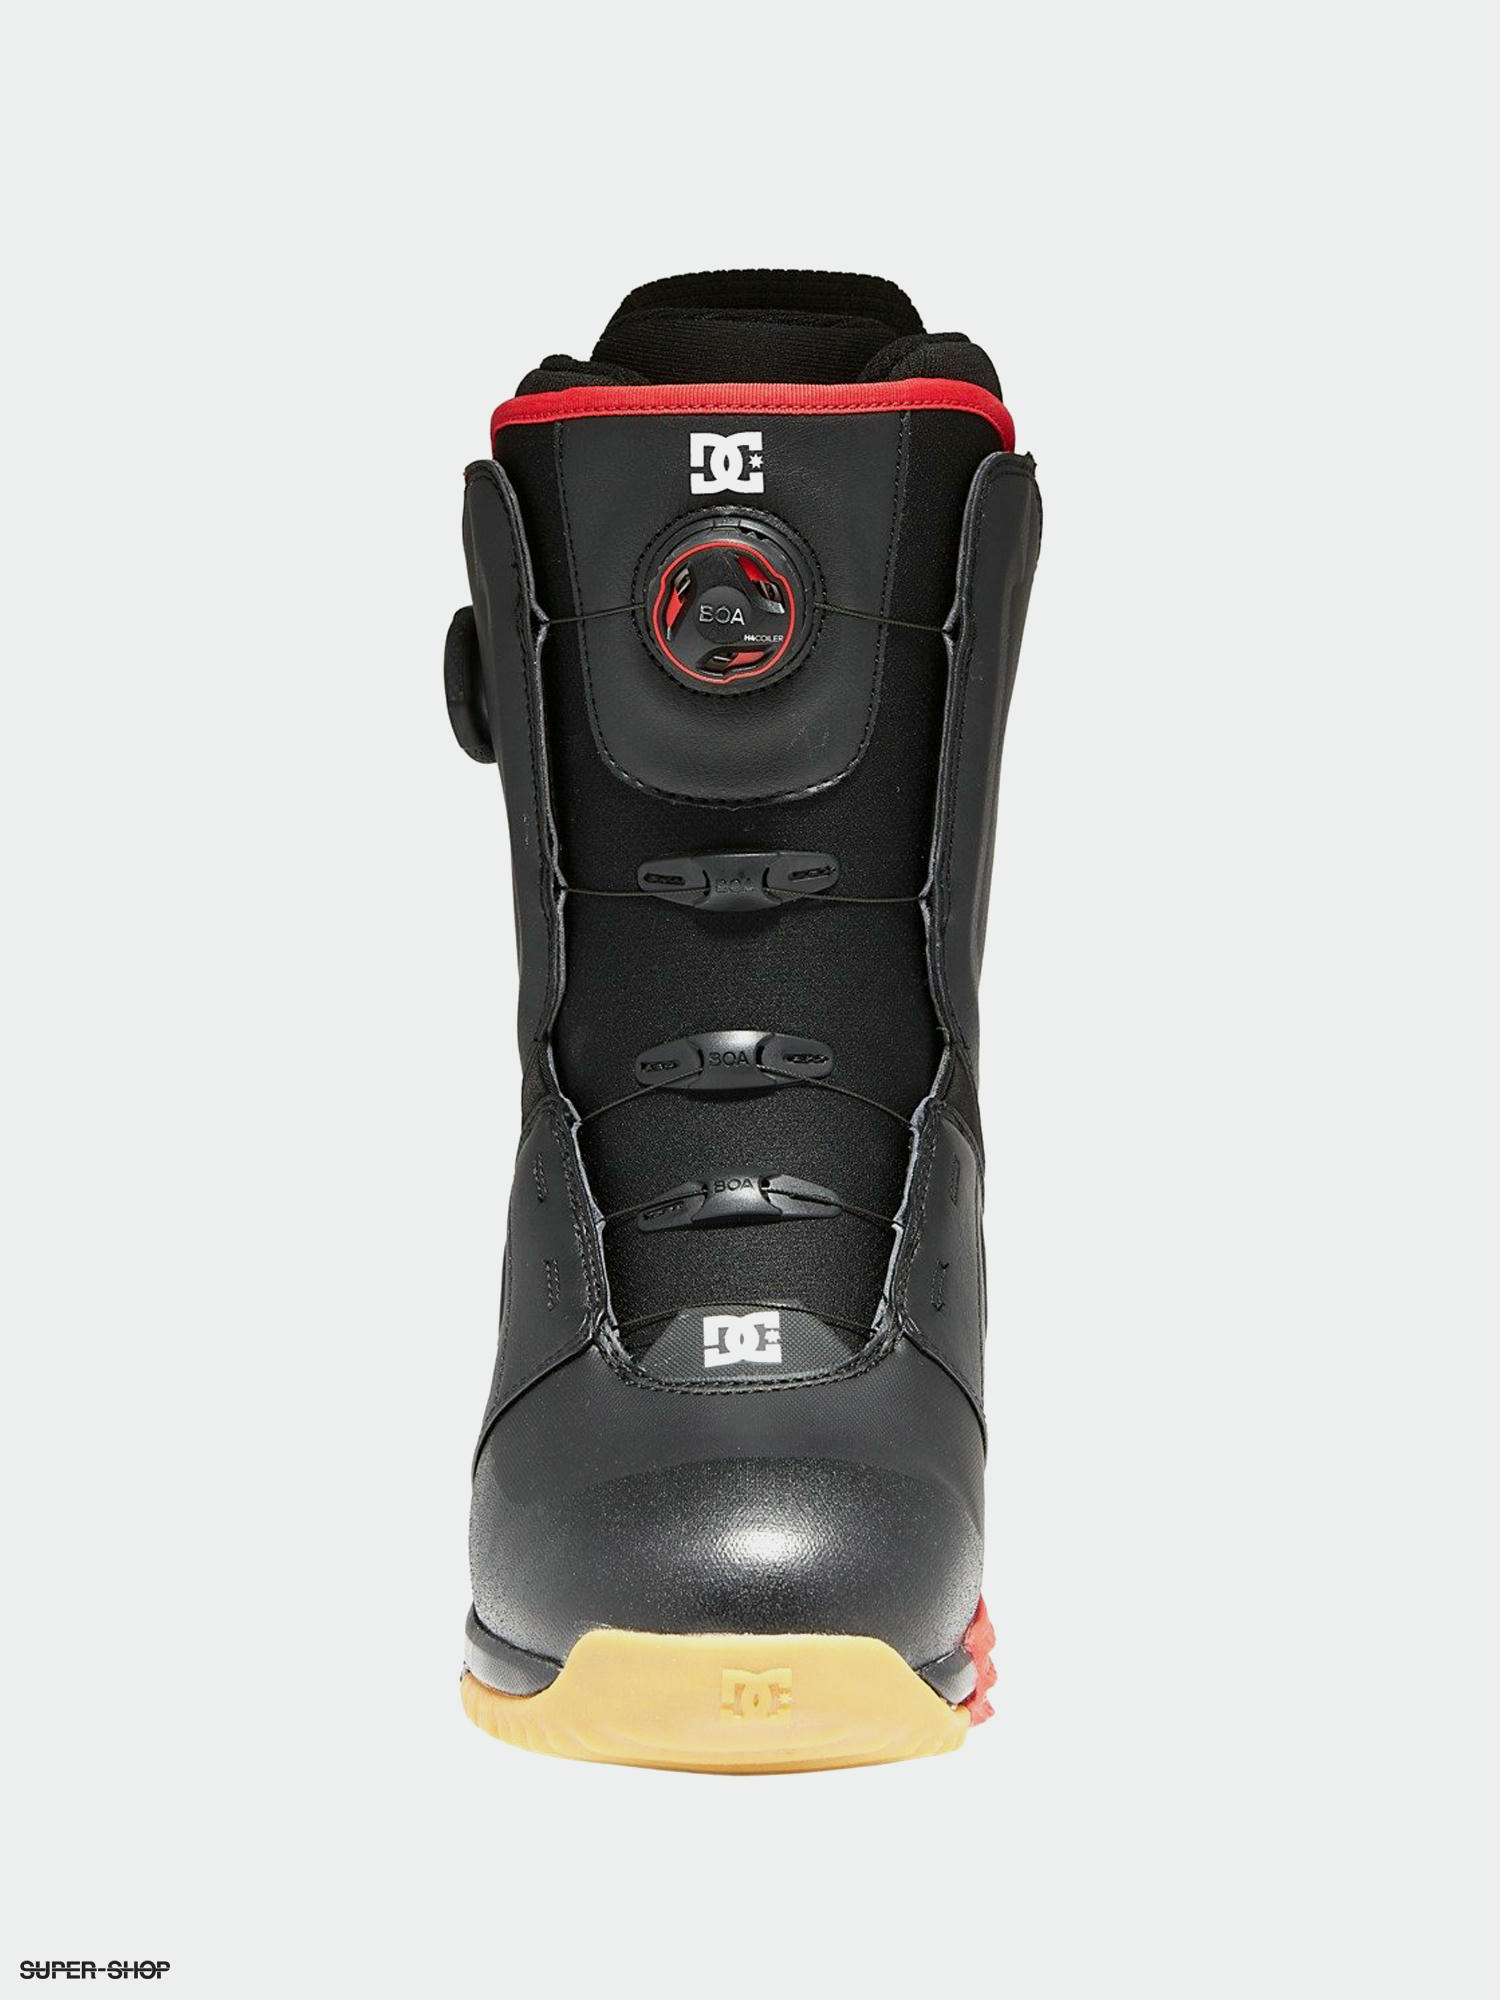 DC Shoes Control BOA® Snowboard Boots for Men ADYO100035 